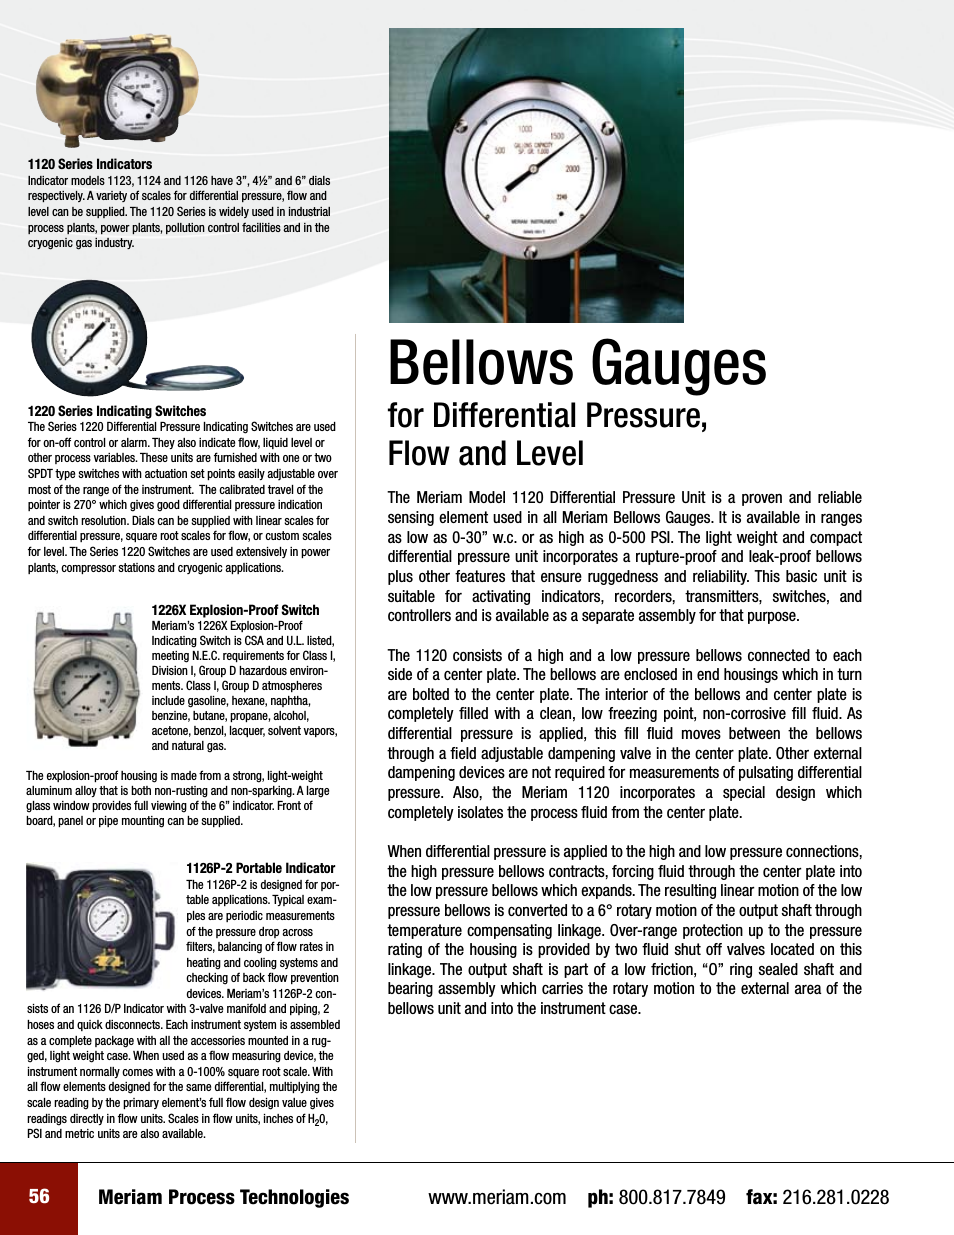 Bellows Gauges for Differential Pressure, flow and Level